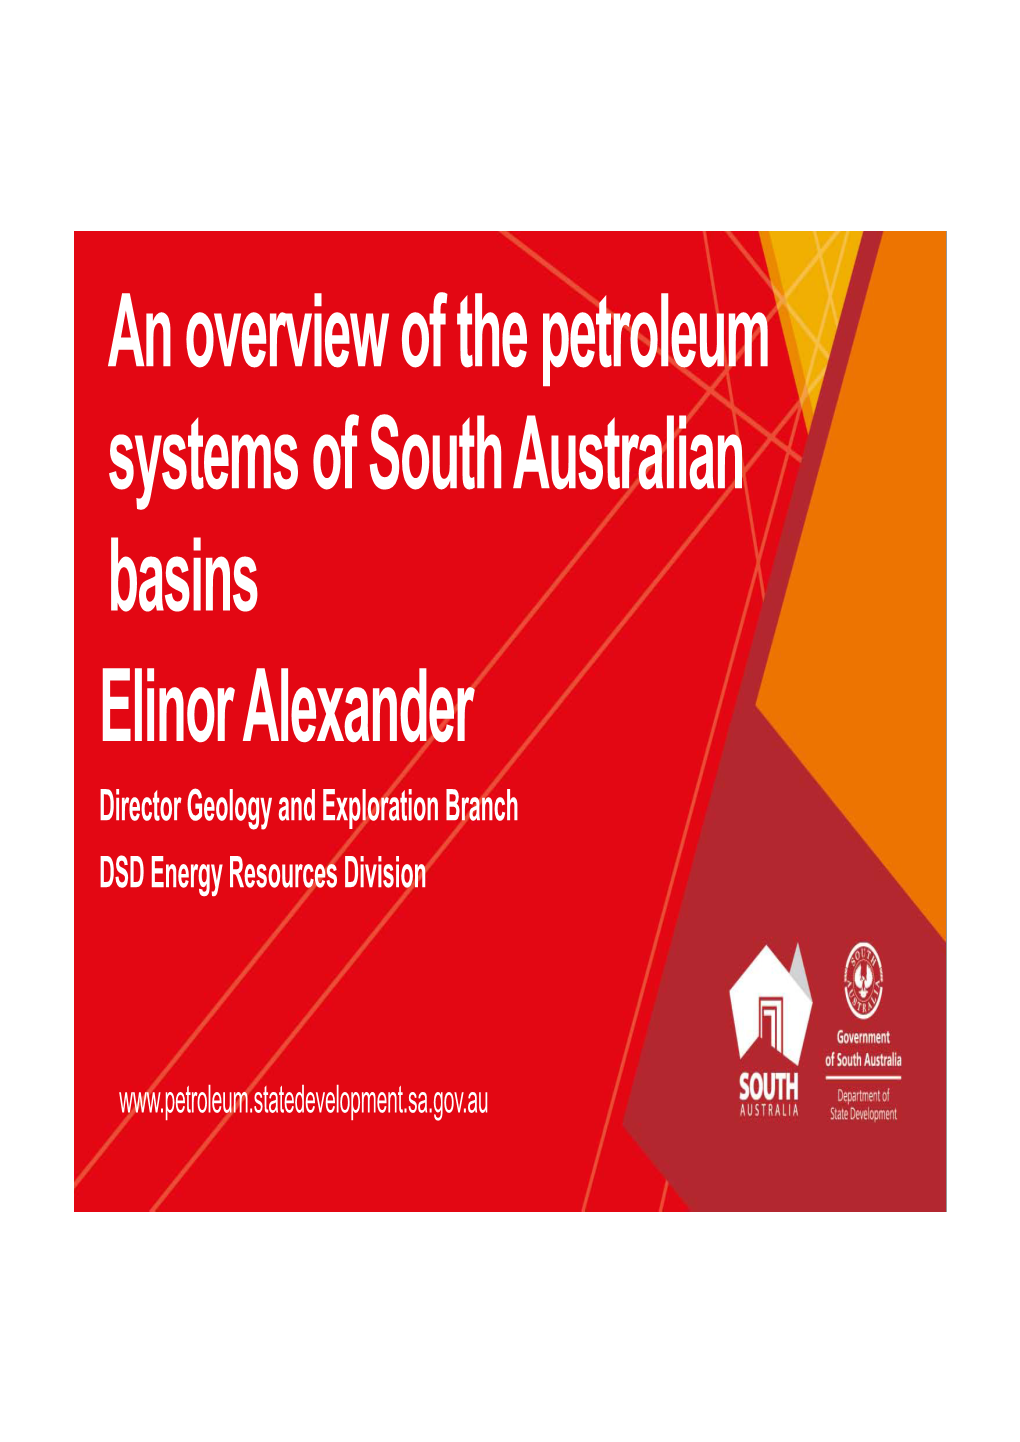 An Overview of the Petroleum Systems of South Australian Basins Elinor Alexander Director Geology and Exploration Branch DSD Energy Resources Division